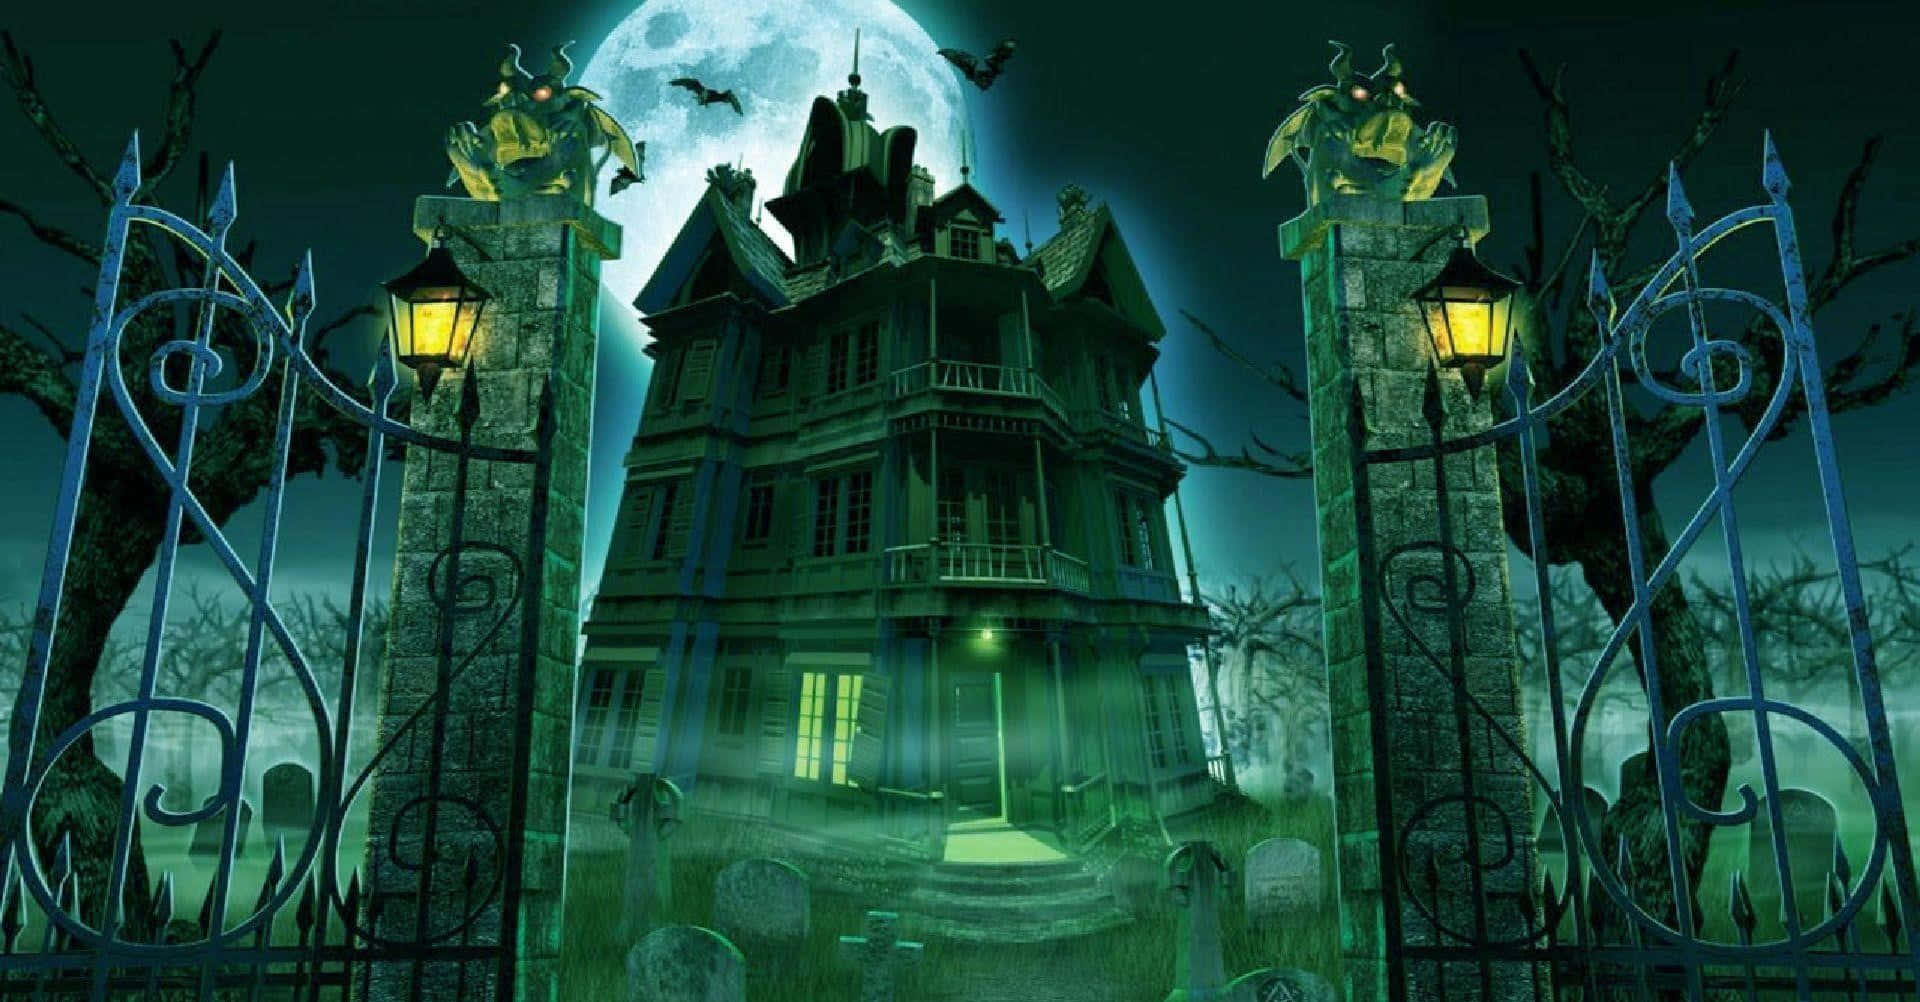 Dare to Enter the Haunted Mansion!